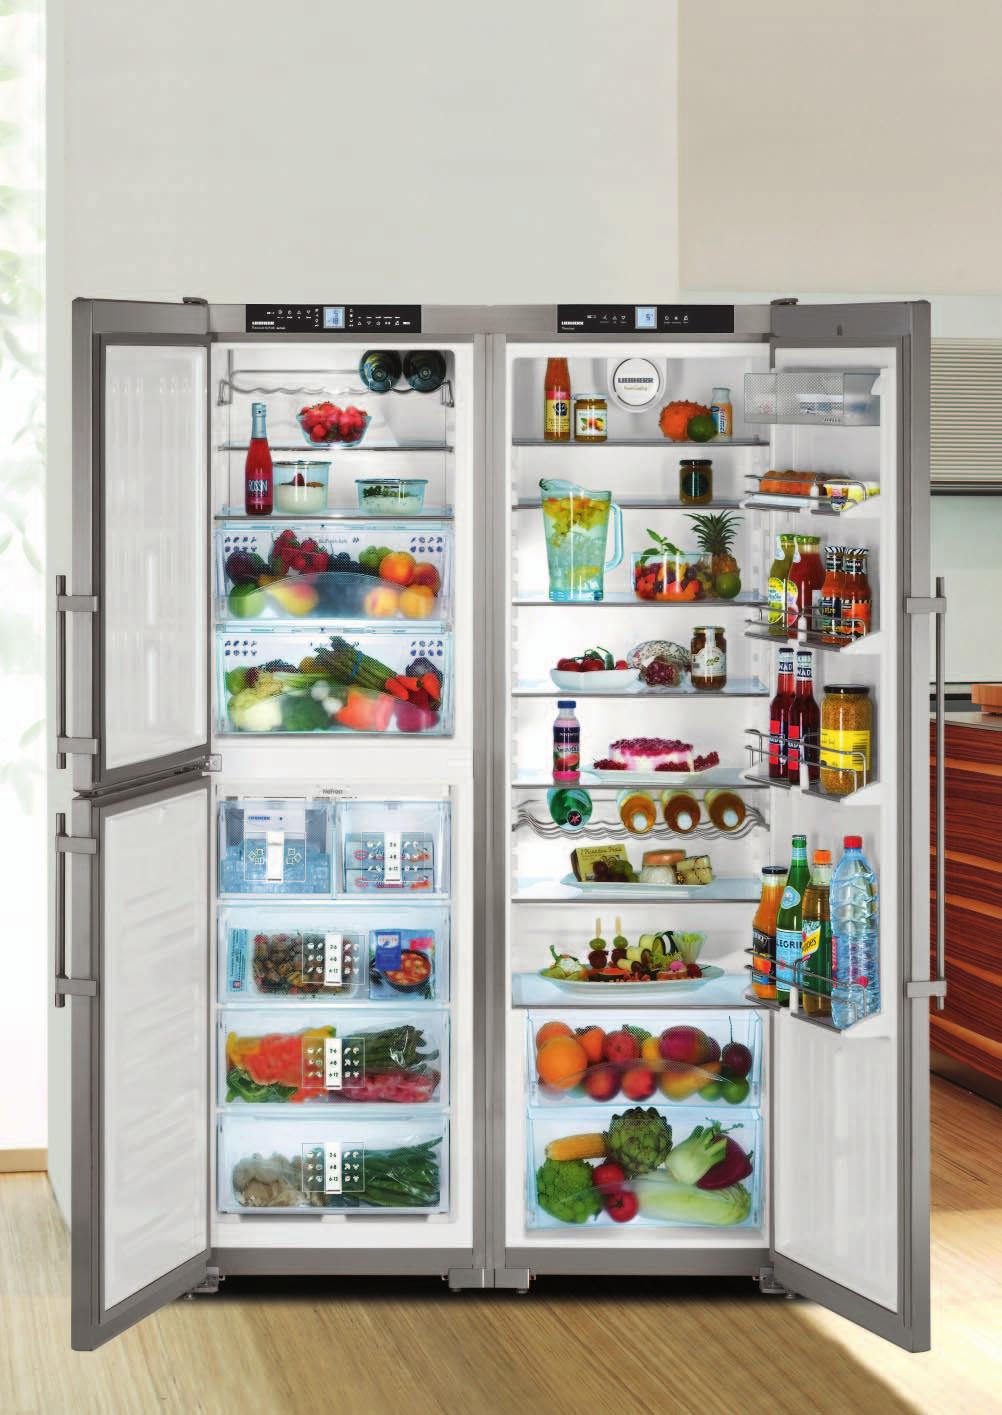 SBSes 7353: The Side-by-Side combination with BioFresh compartment Apart from a spacious refrigerator compartment, the Side-by-Side combination SBSes 7353 also offers two large BioFresh drawers.